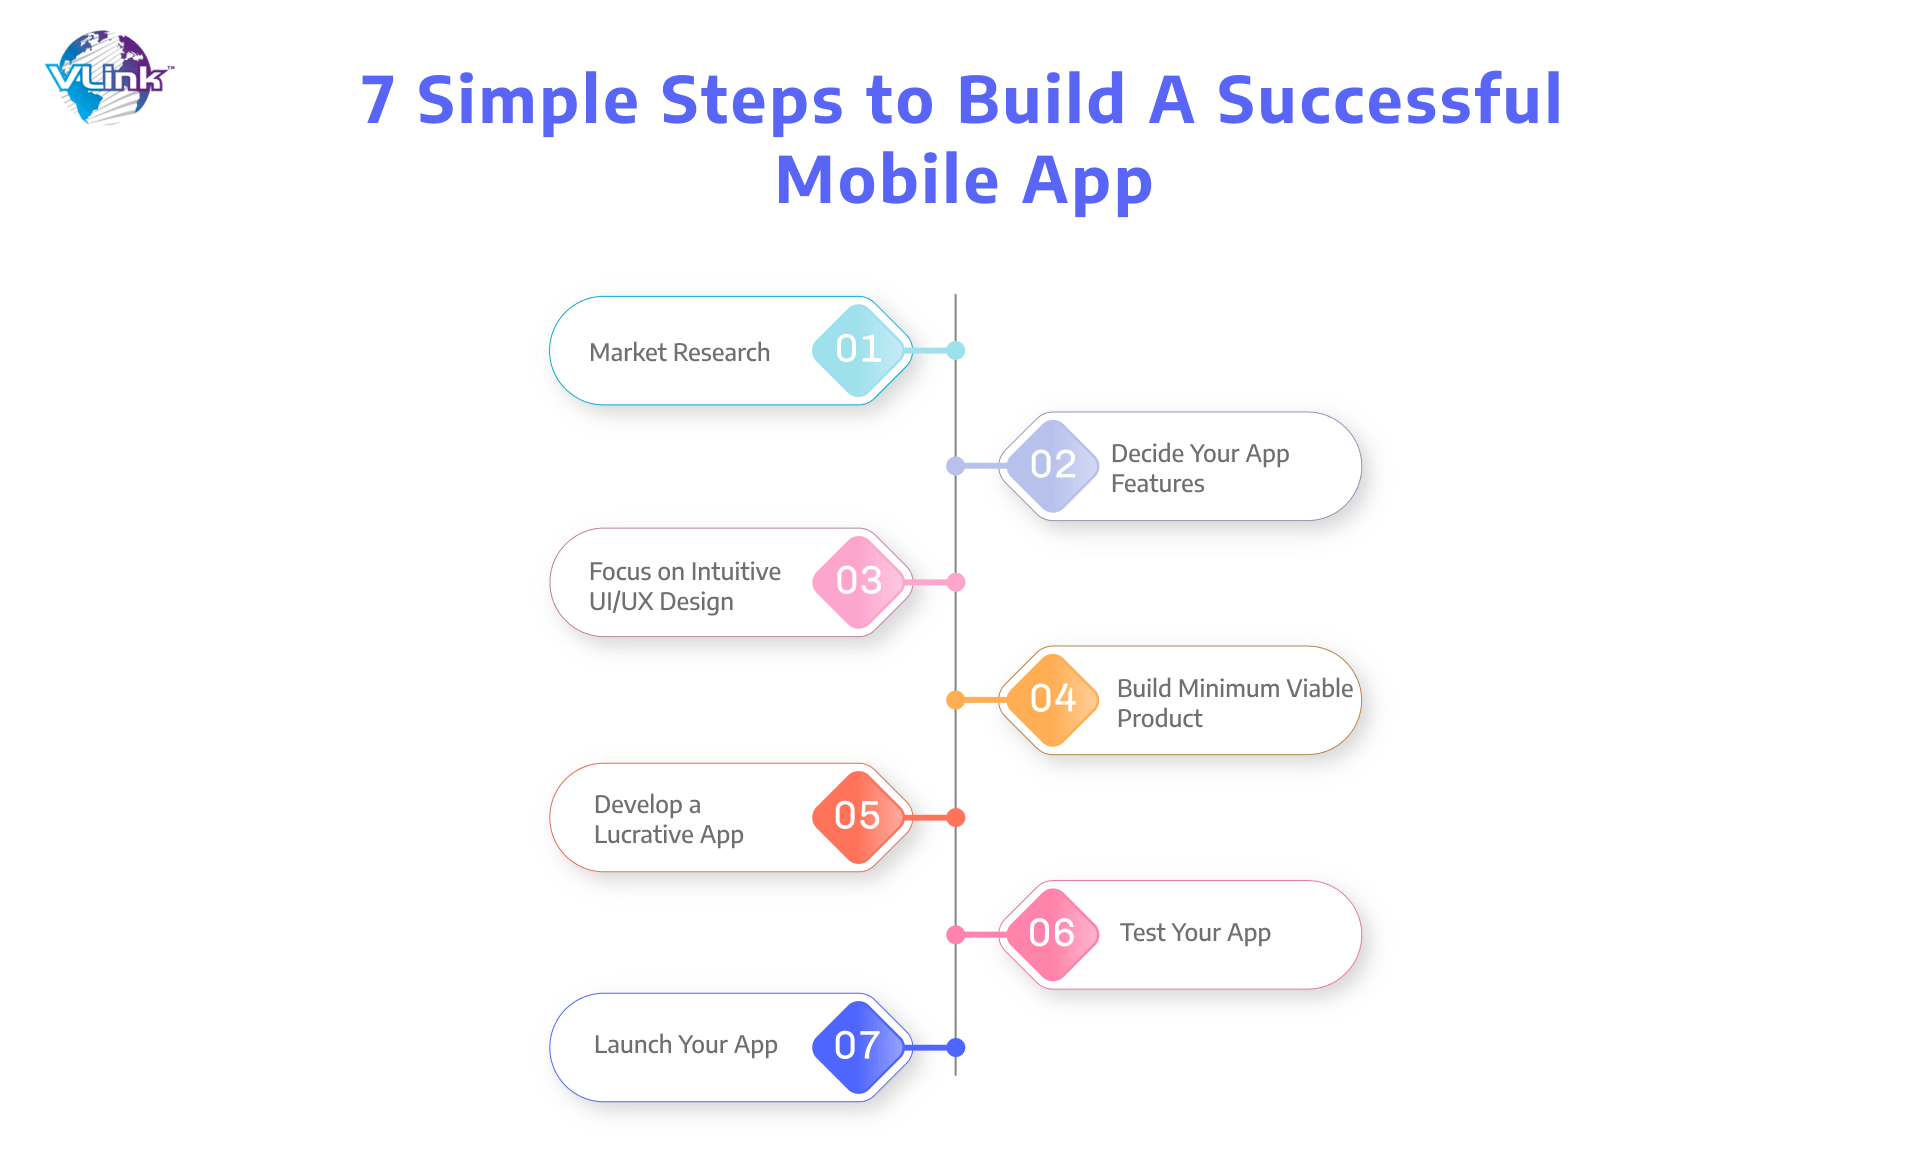 Steps to Build A Successful Mobile App